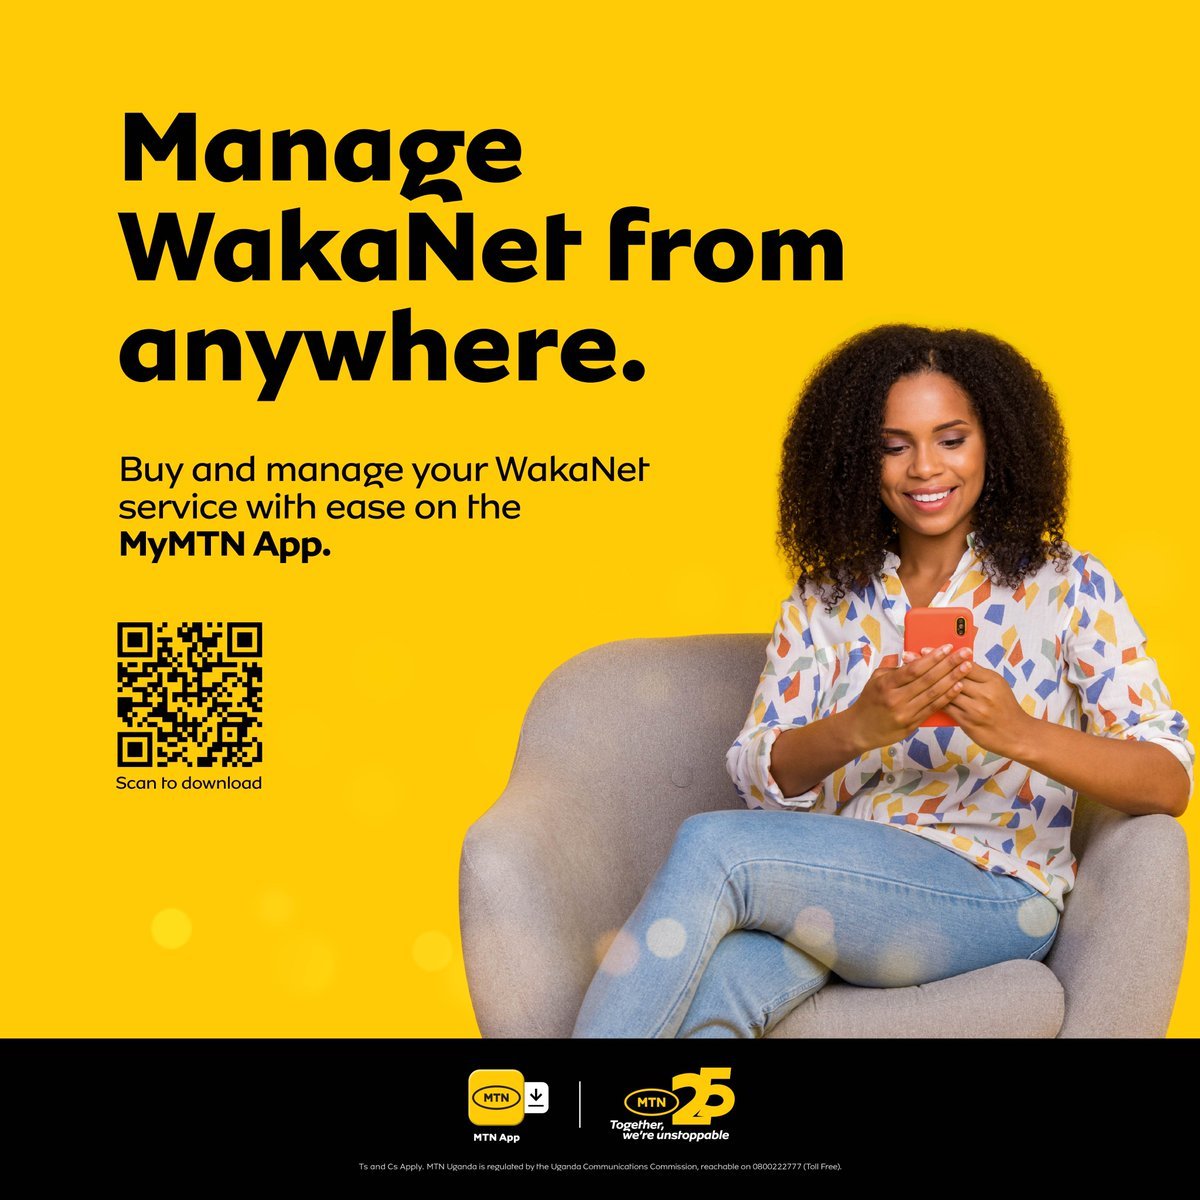 Manage your #MTNWakaNet from anywhere - Simply download the #MyMTN app today to get started.
#MtnInternet